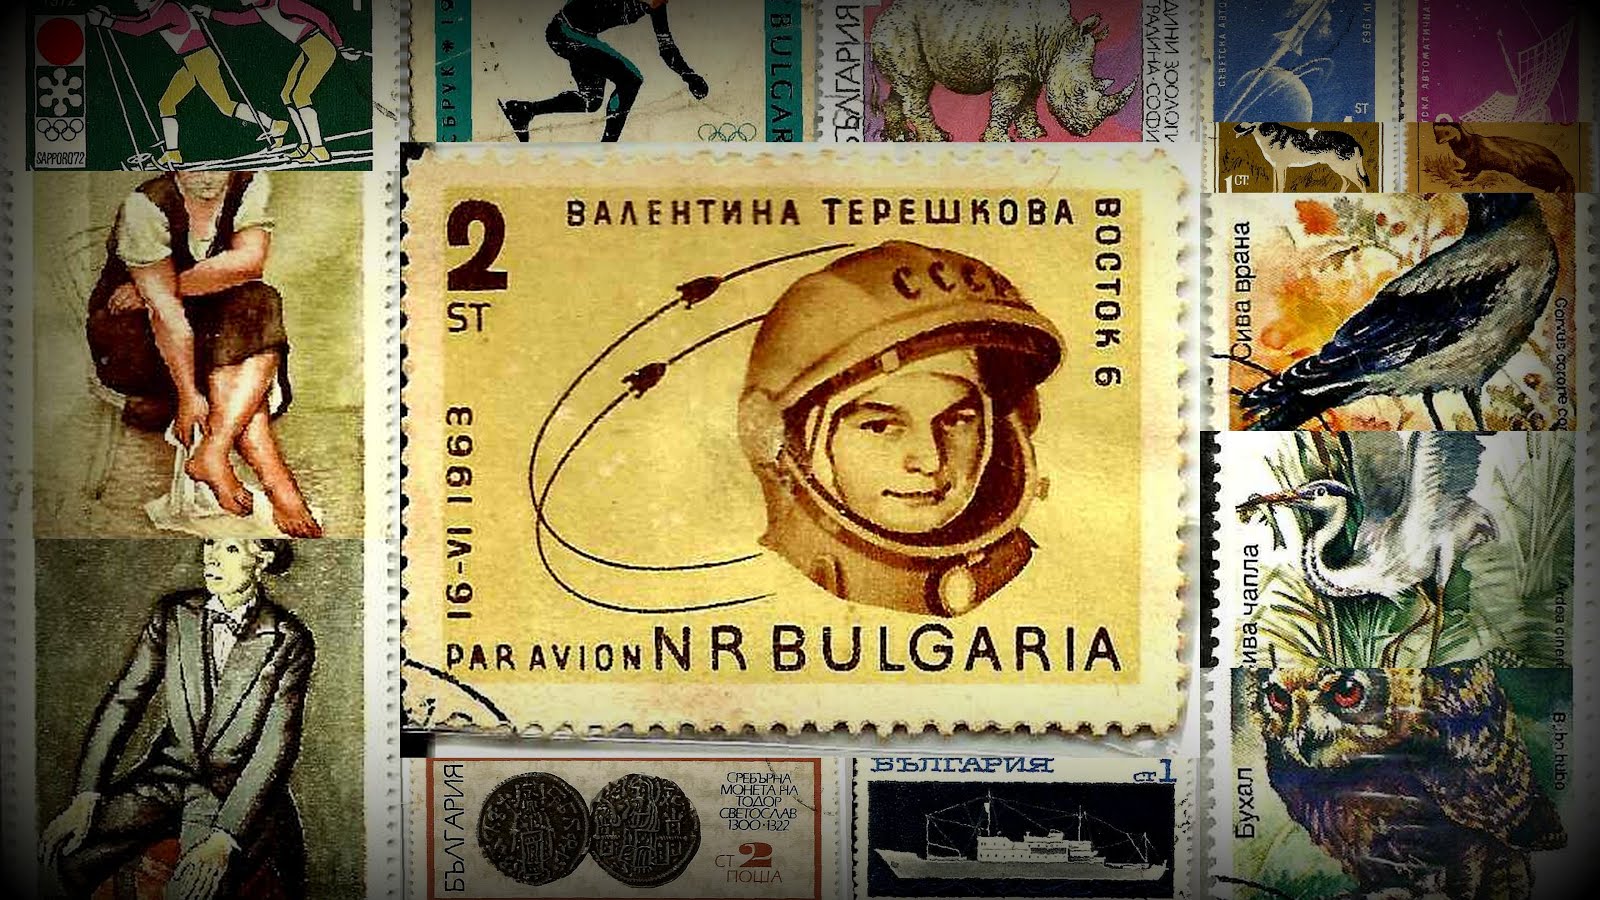 My Stamps of Bulgaria